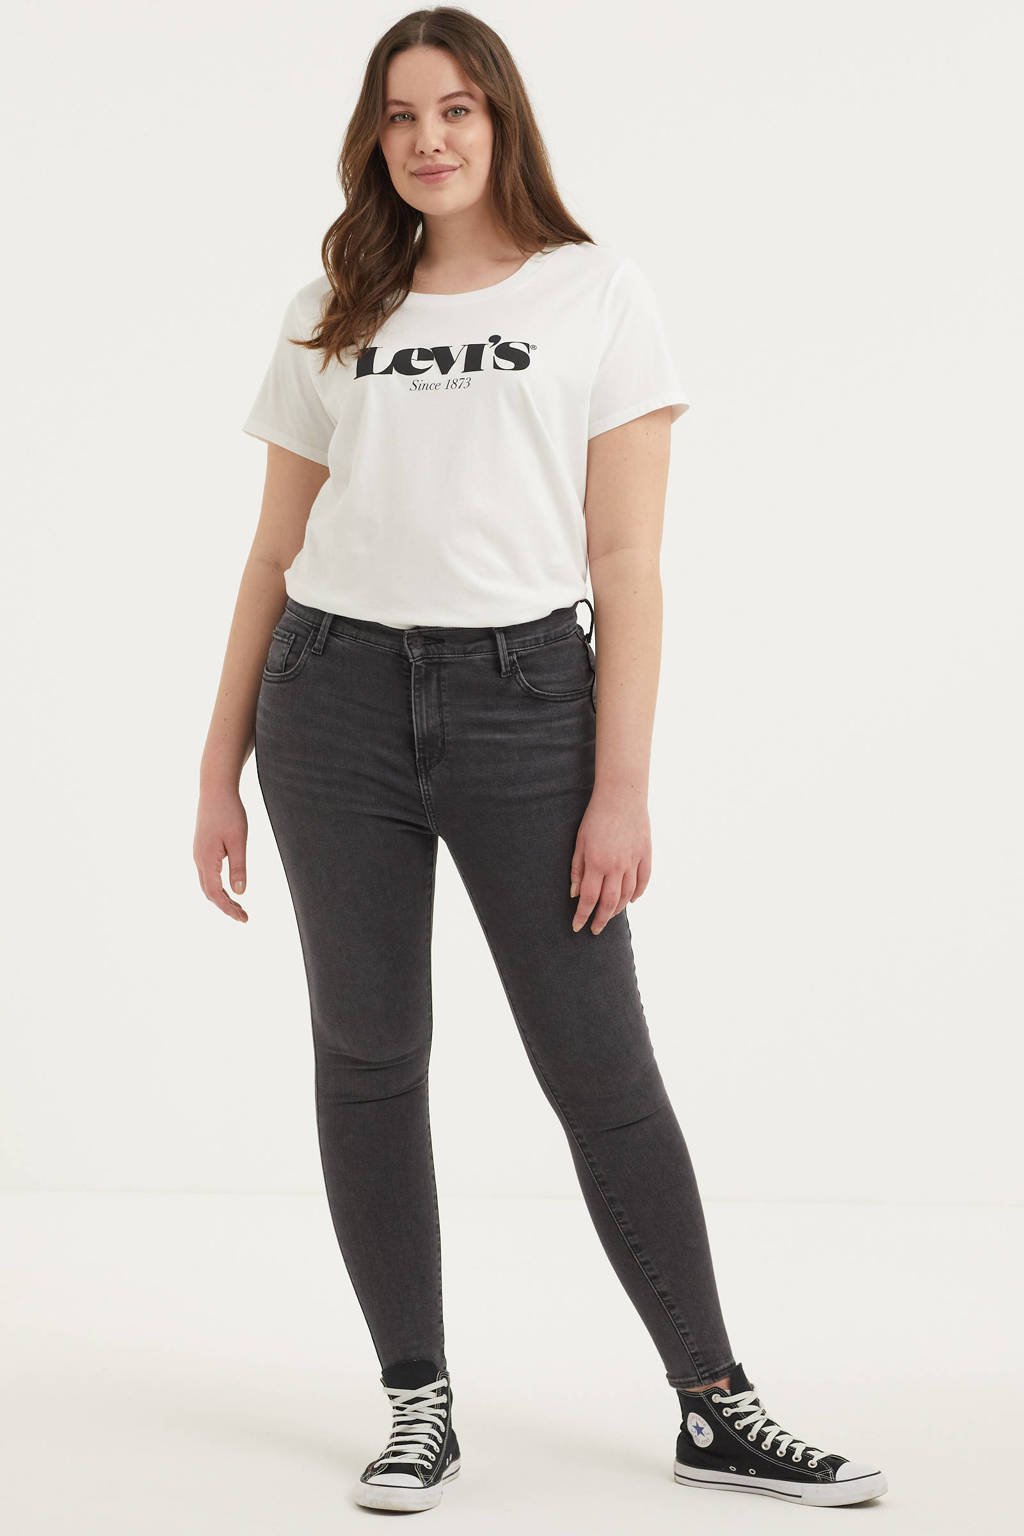 Levi's Plus 720 high waist super skinny jeans smoked out